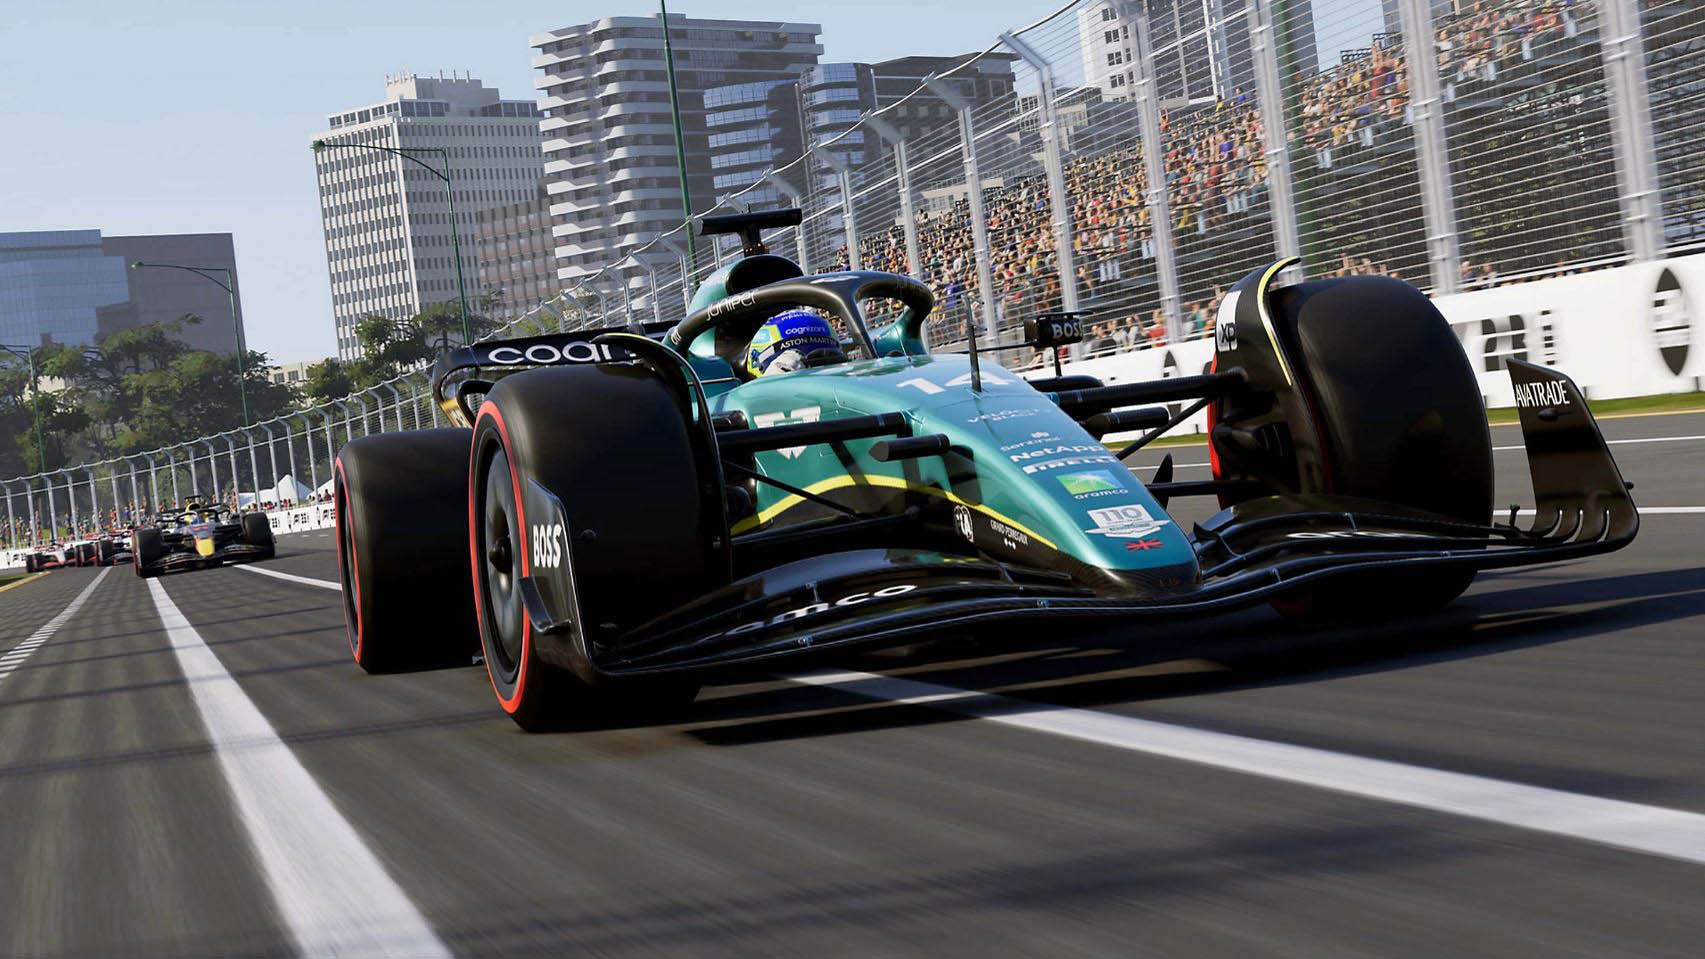 F1 23 GAME MUST HAVES! - 7 THINGS I WANT IN F1 23 MY TEAM CAREER MODE! 